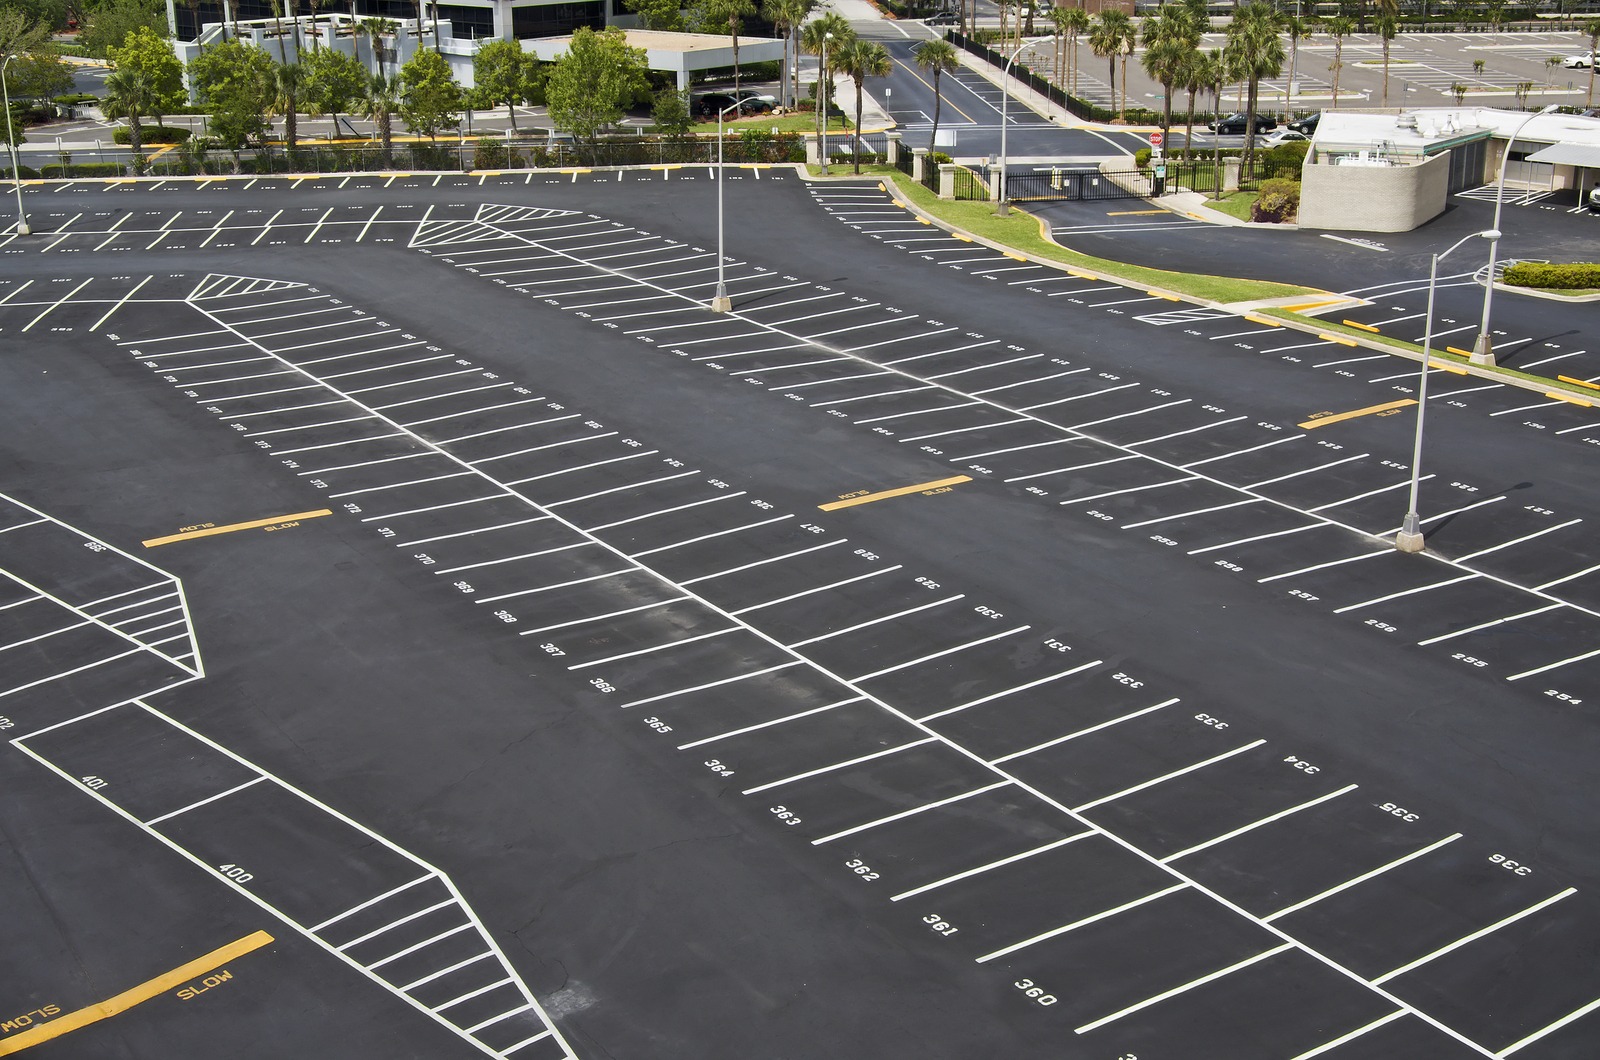 What Are the Key Benefits of Parking Lot Striping Services in Fayetteville, AR?